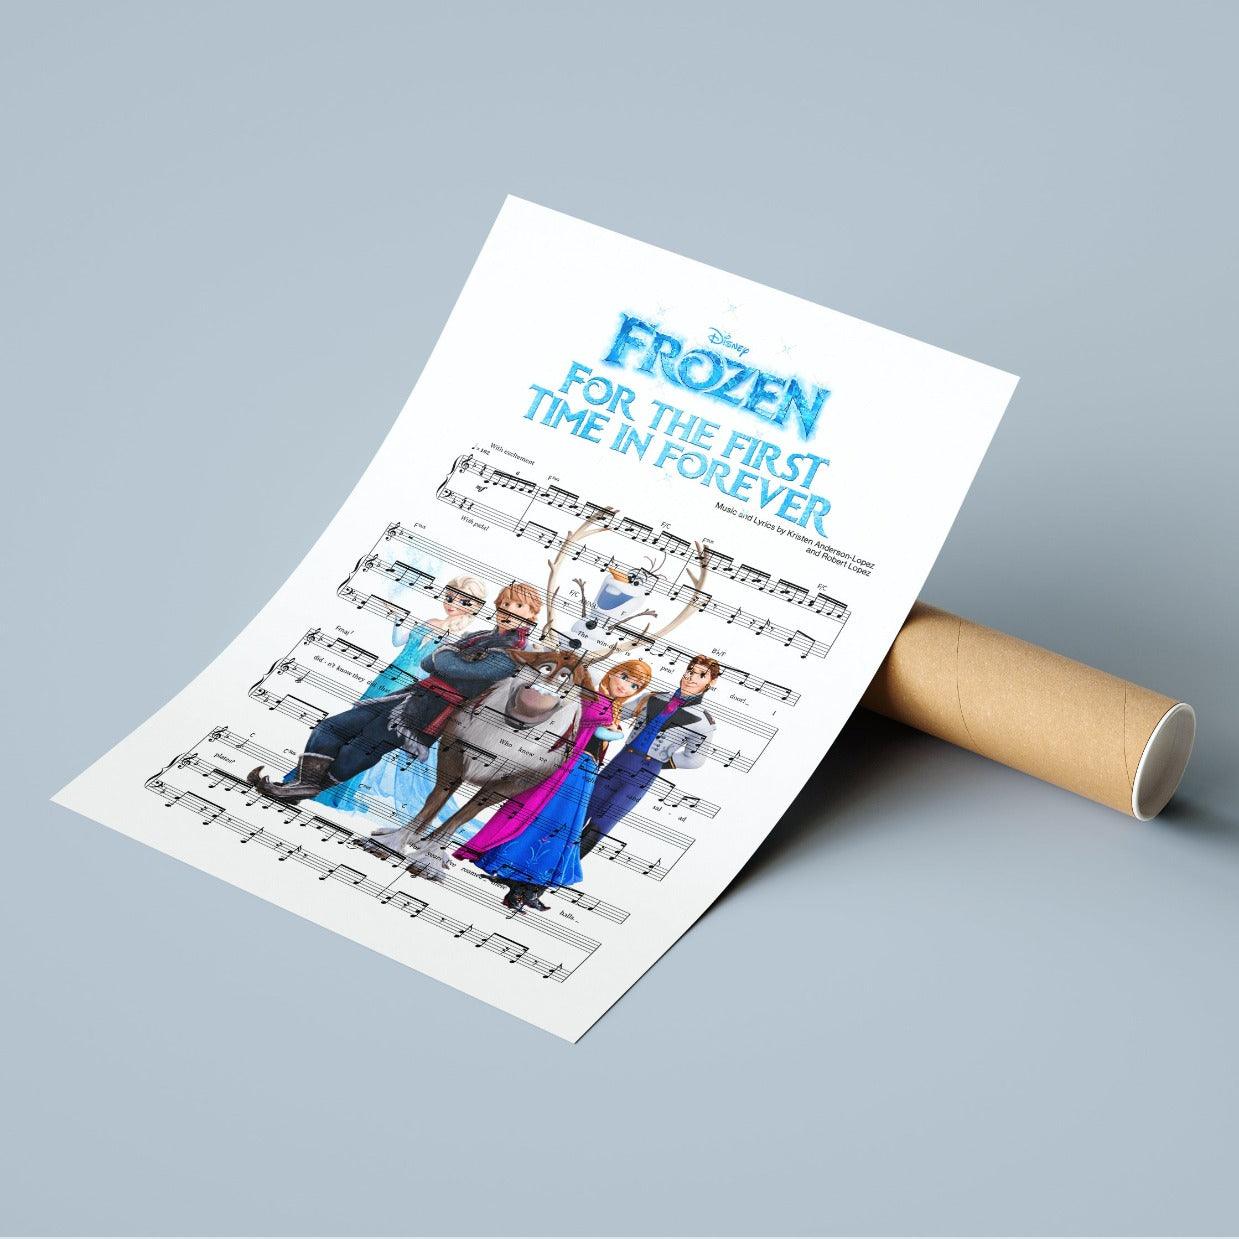  Capture the enchanting lyrics of "For the First Time in Forever" with this unique poster! Show off your love of Frozen with this hand-crafted print, perfect for gifting or decorating any space. From music and lyrics prints to framed lyric prints, you'll find the perfect way to demonstrate your fandom! (Who doesn't love a good "let it go" moment?)